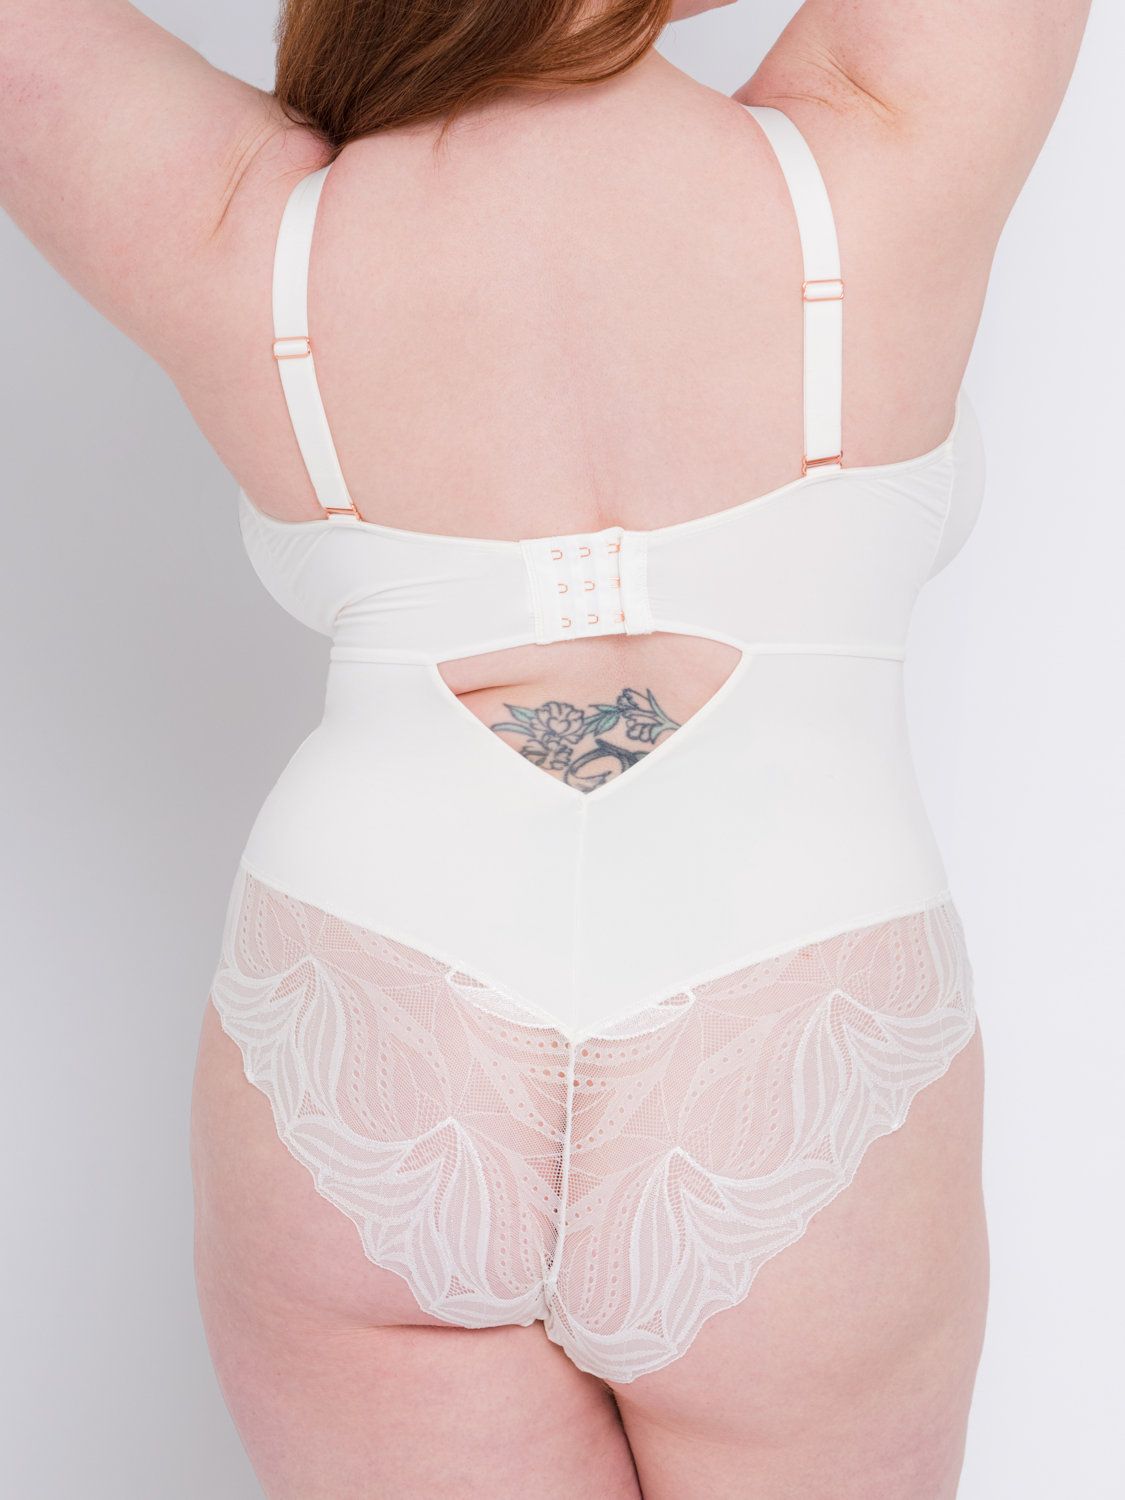 Scantilly by Curvy Kate Indulgence Lace Body Ivory